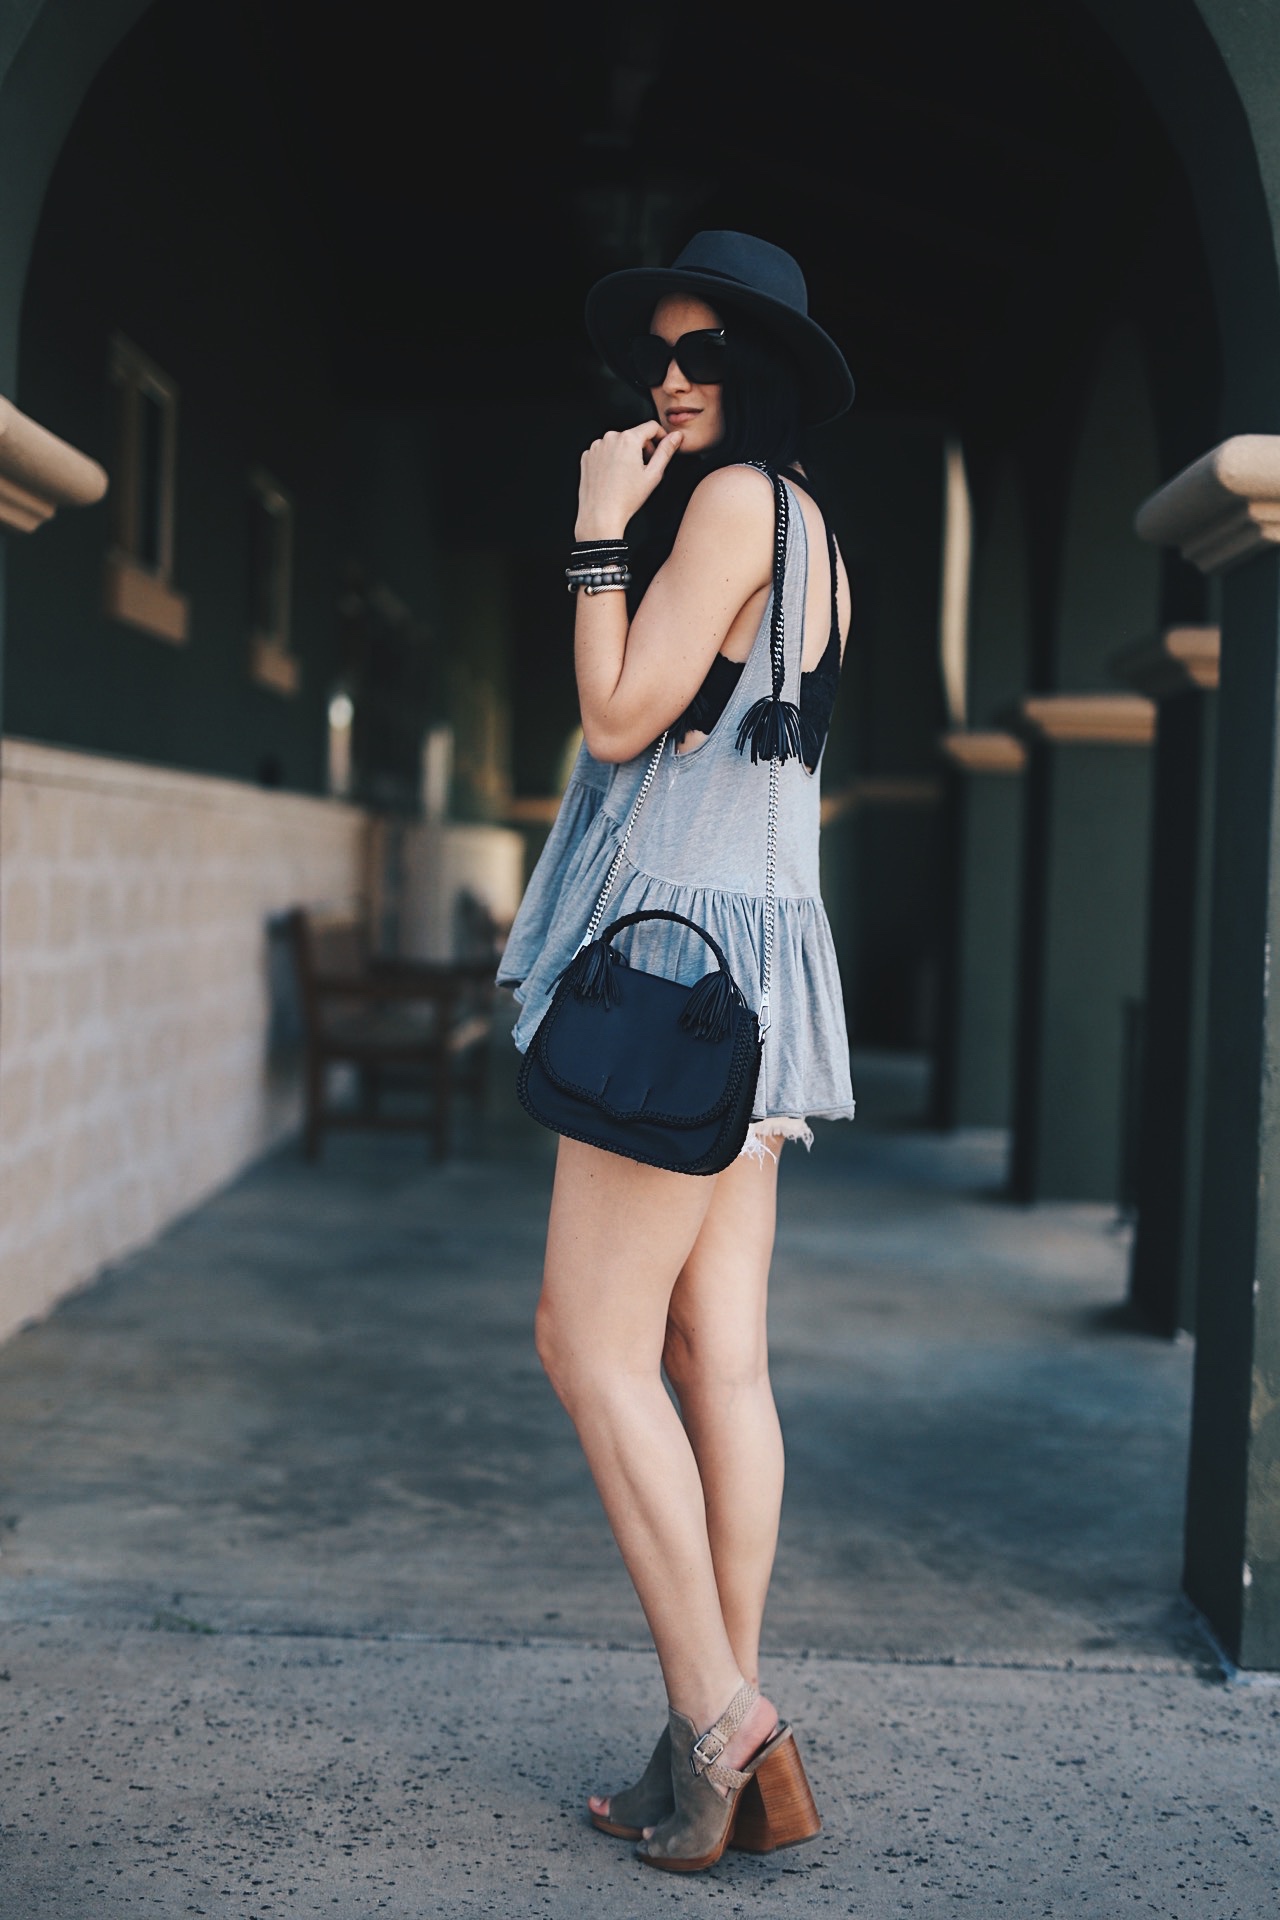 Ashley of DTKAustin shares one of her favorite SXSW festival looks. This Free People top is on sale for $30 and this Rebecca Minkoff bag is a new release! Click for more photos and info.